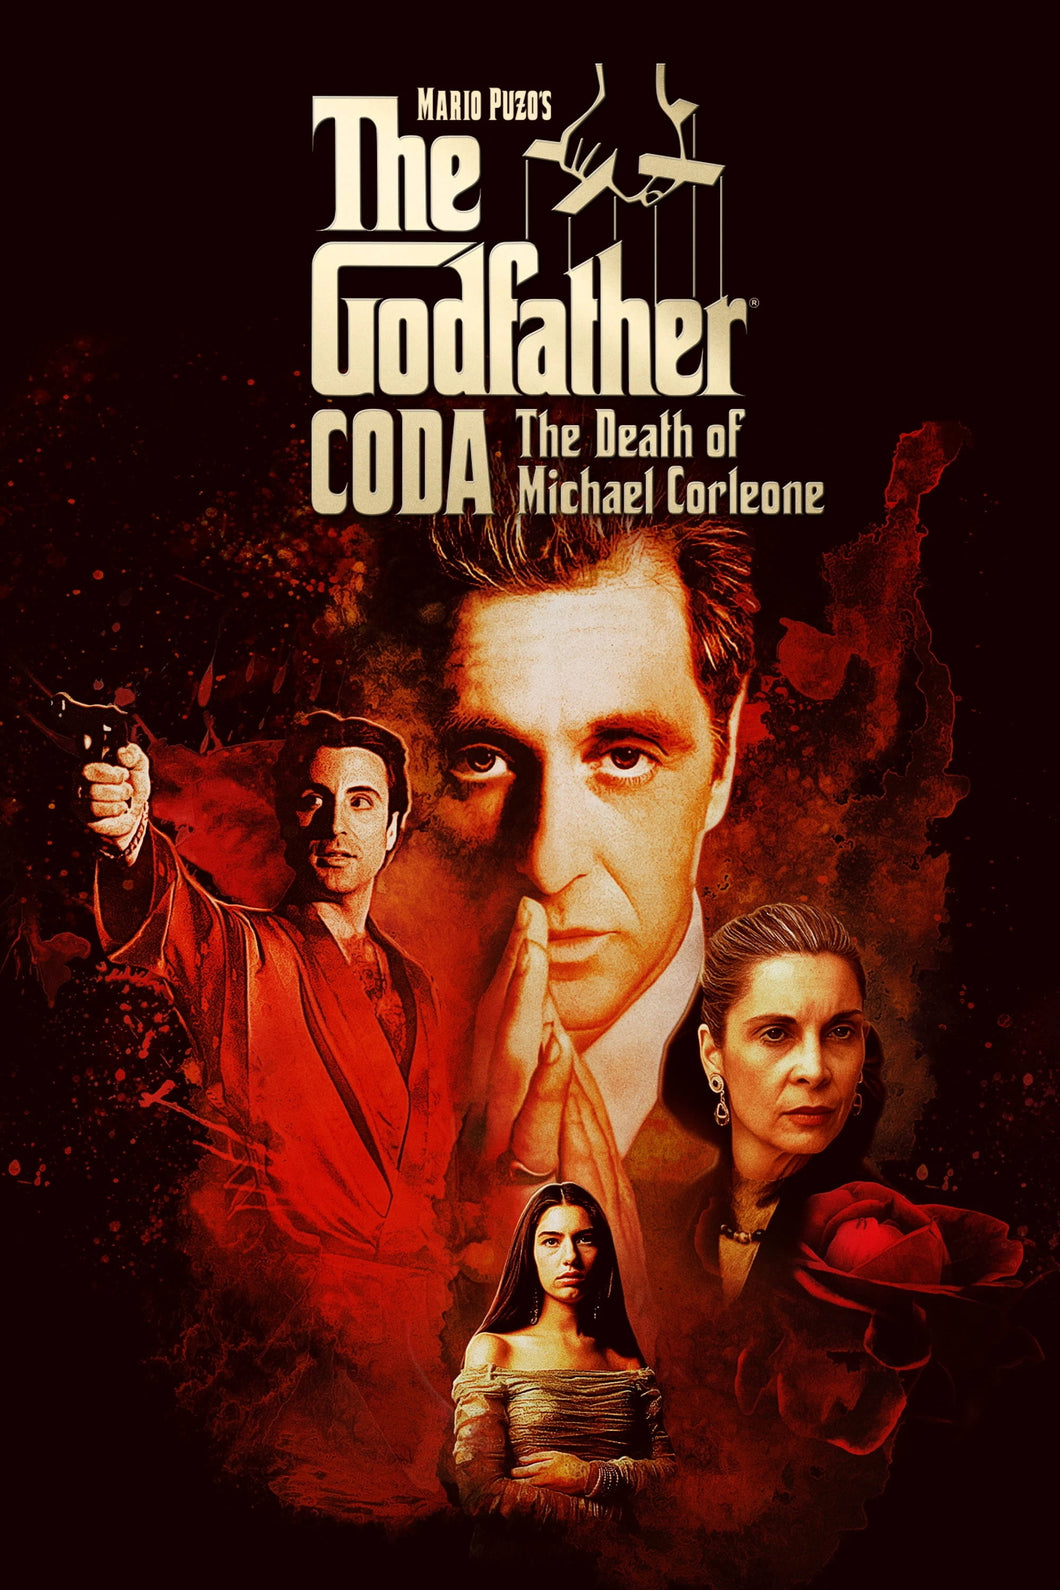 The Godfather  Part III (1990) Movie Poster High Quality Glossy Paper A1 A2 A3 A4 A3 Framed or Unframed!!!